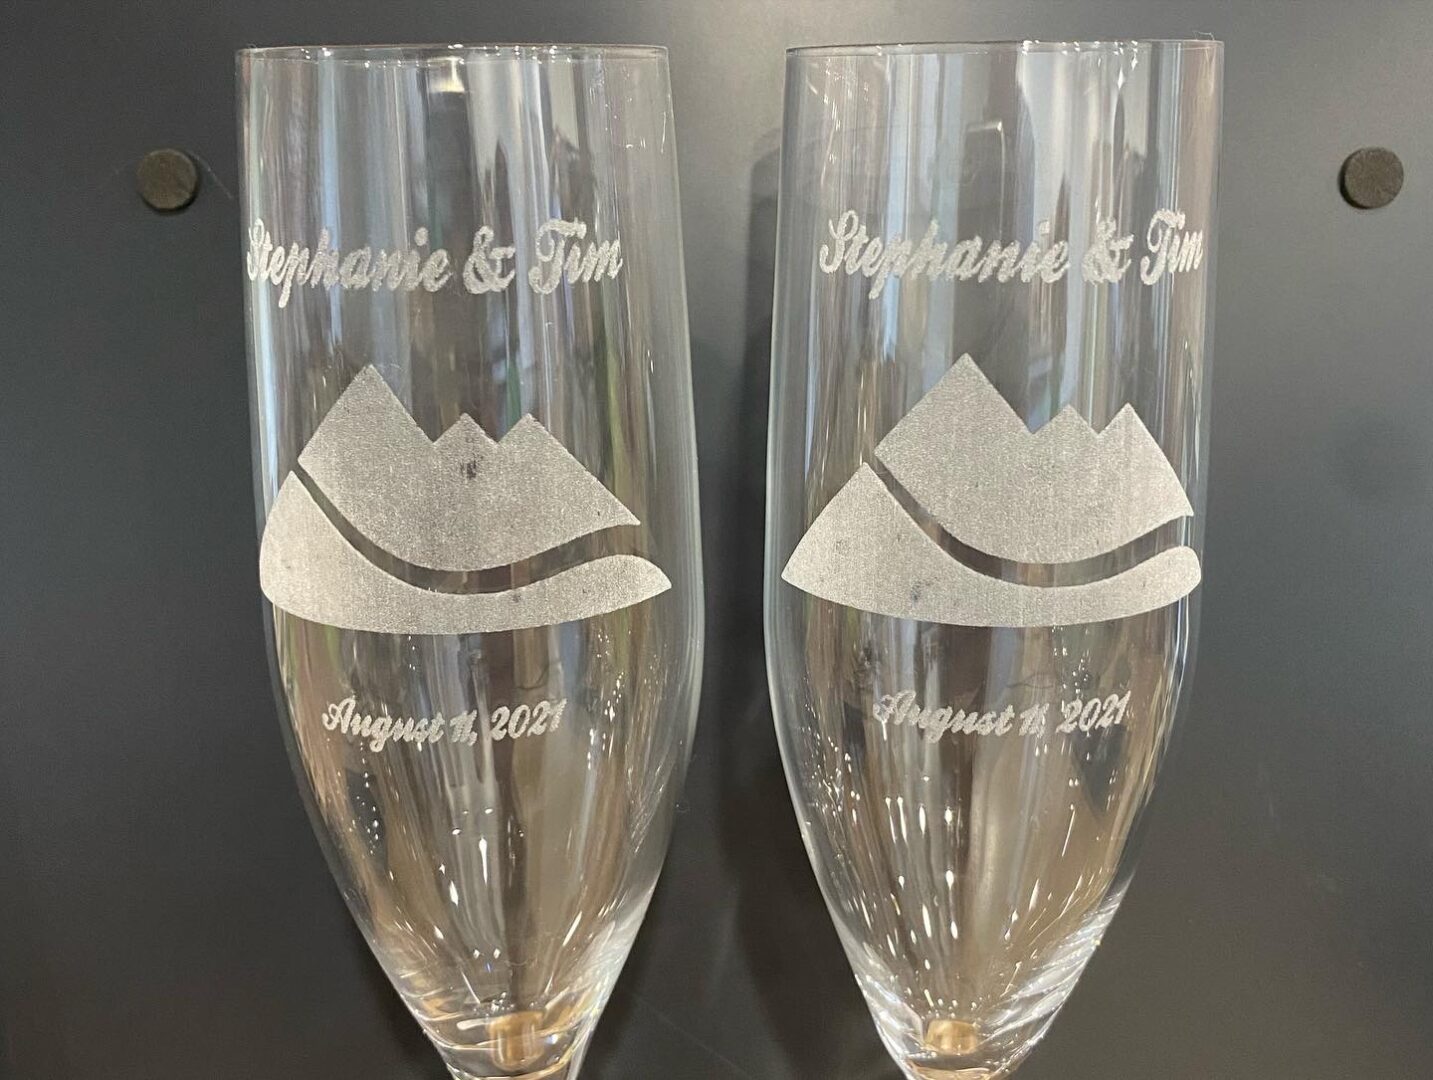 wine glasses with engraving